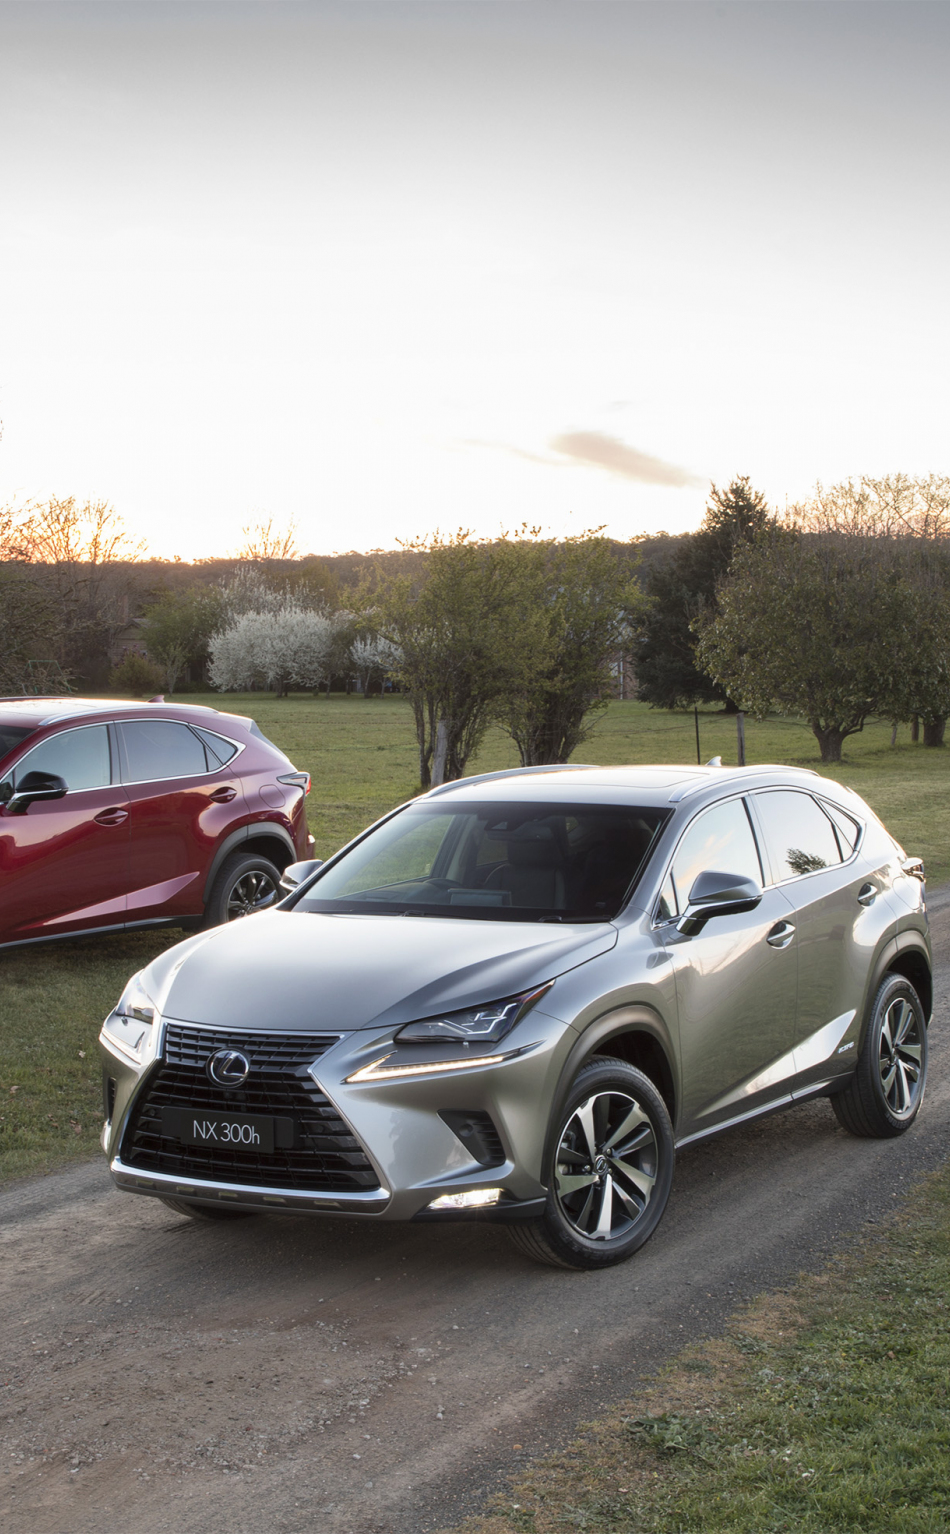 Download 950x1534 Wallpaper Lexus Nx Cars Iphone 950x1534 Hd Image Background 5332